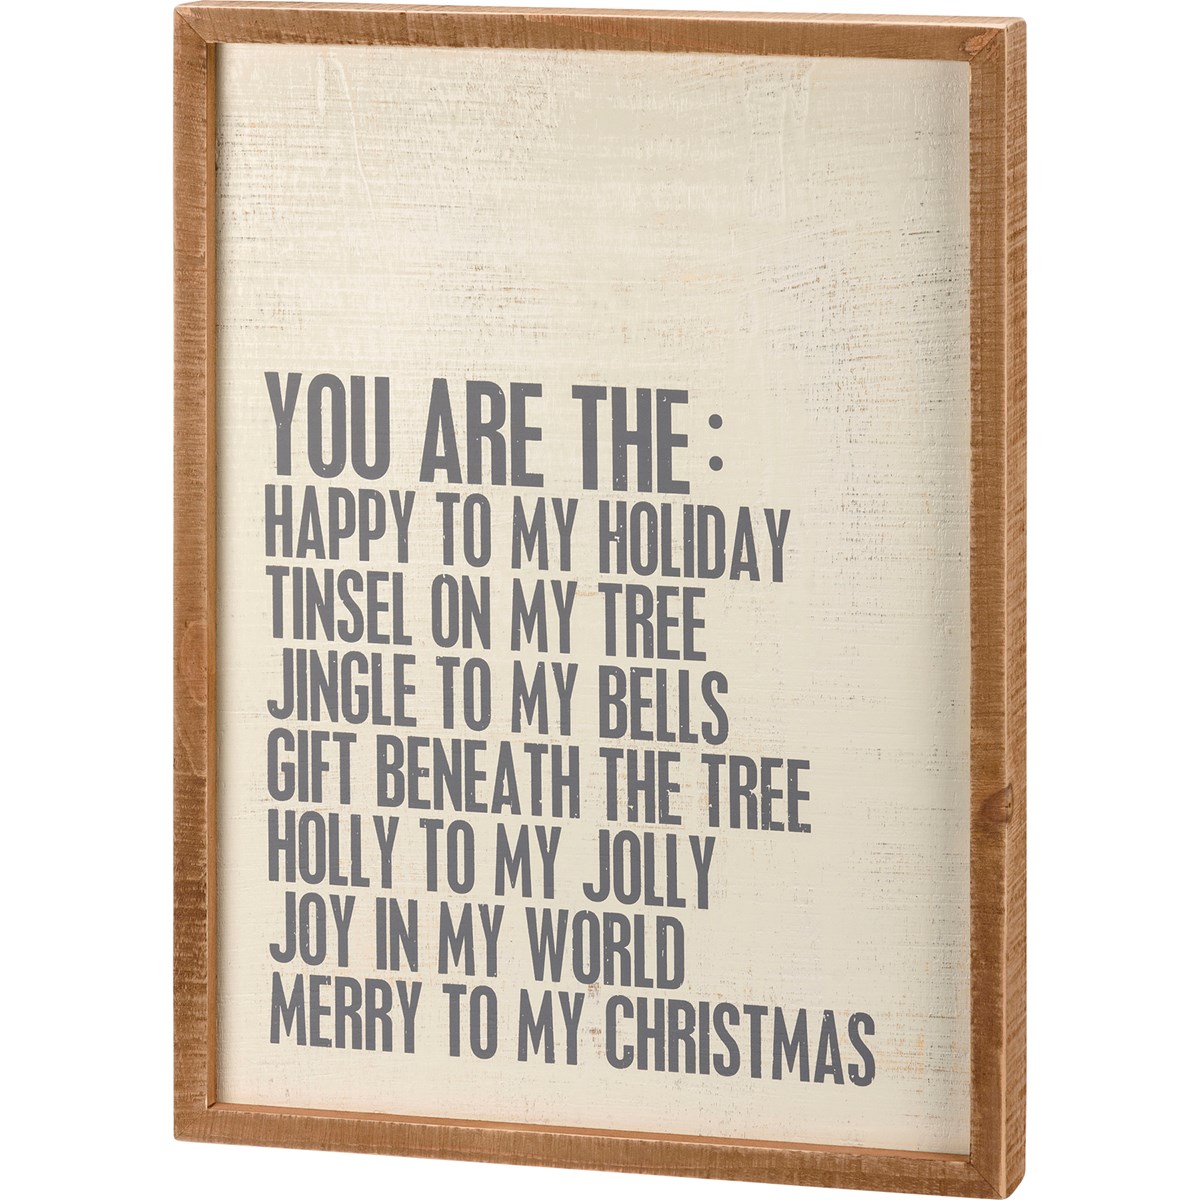 You Are The Happy To My Holiday Inset Box Sign - Wood